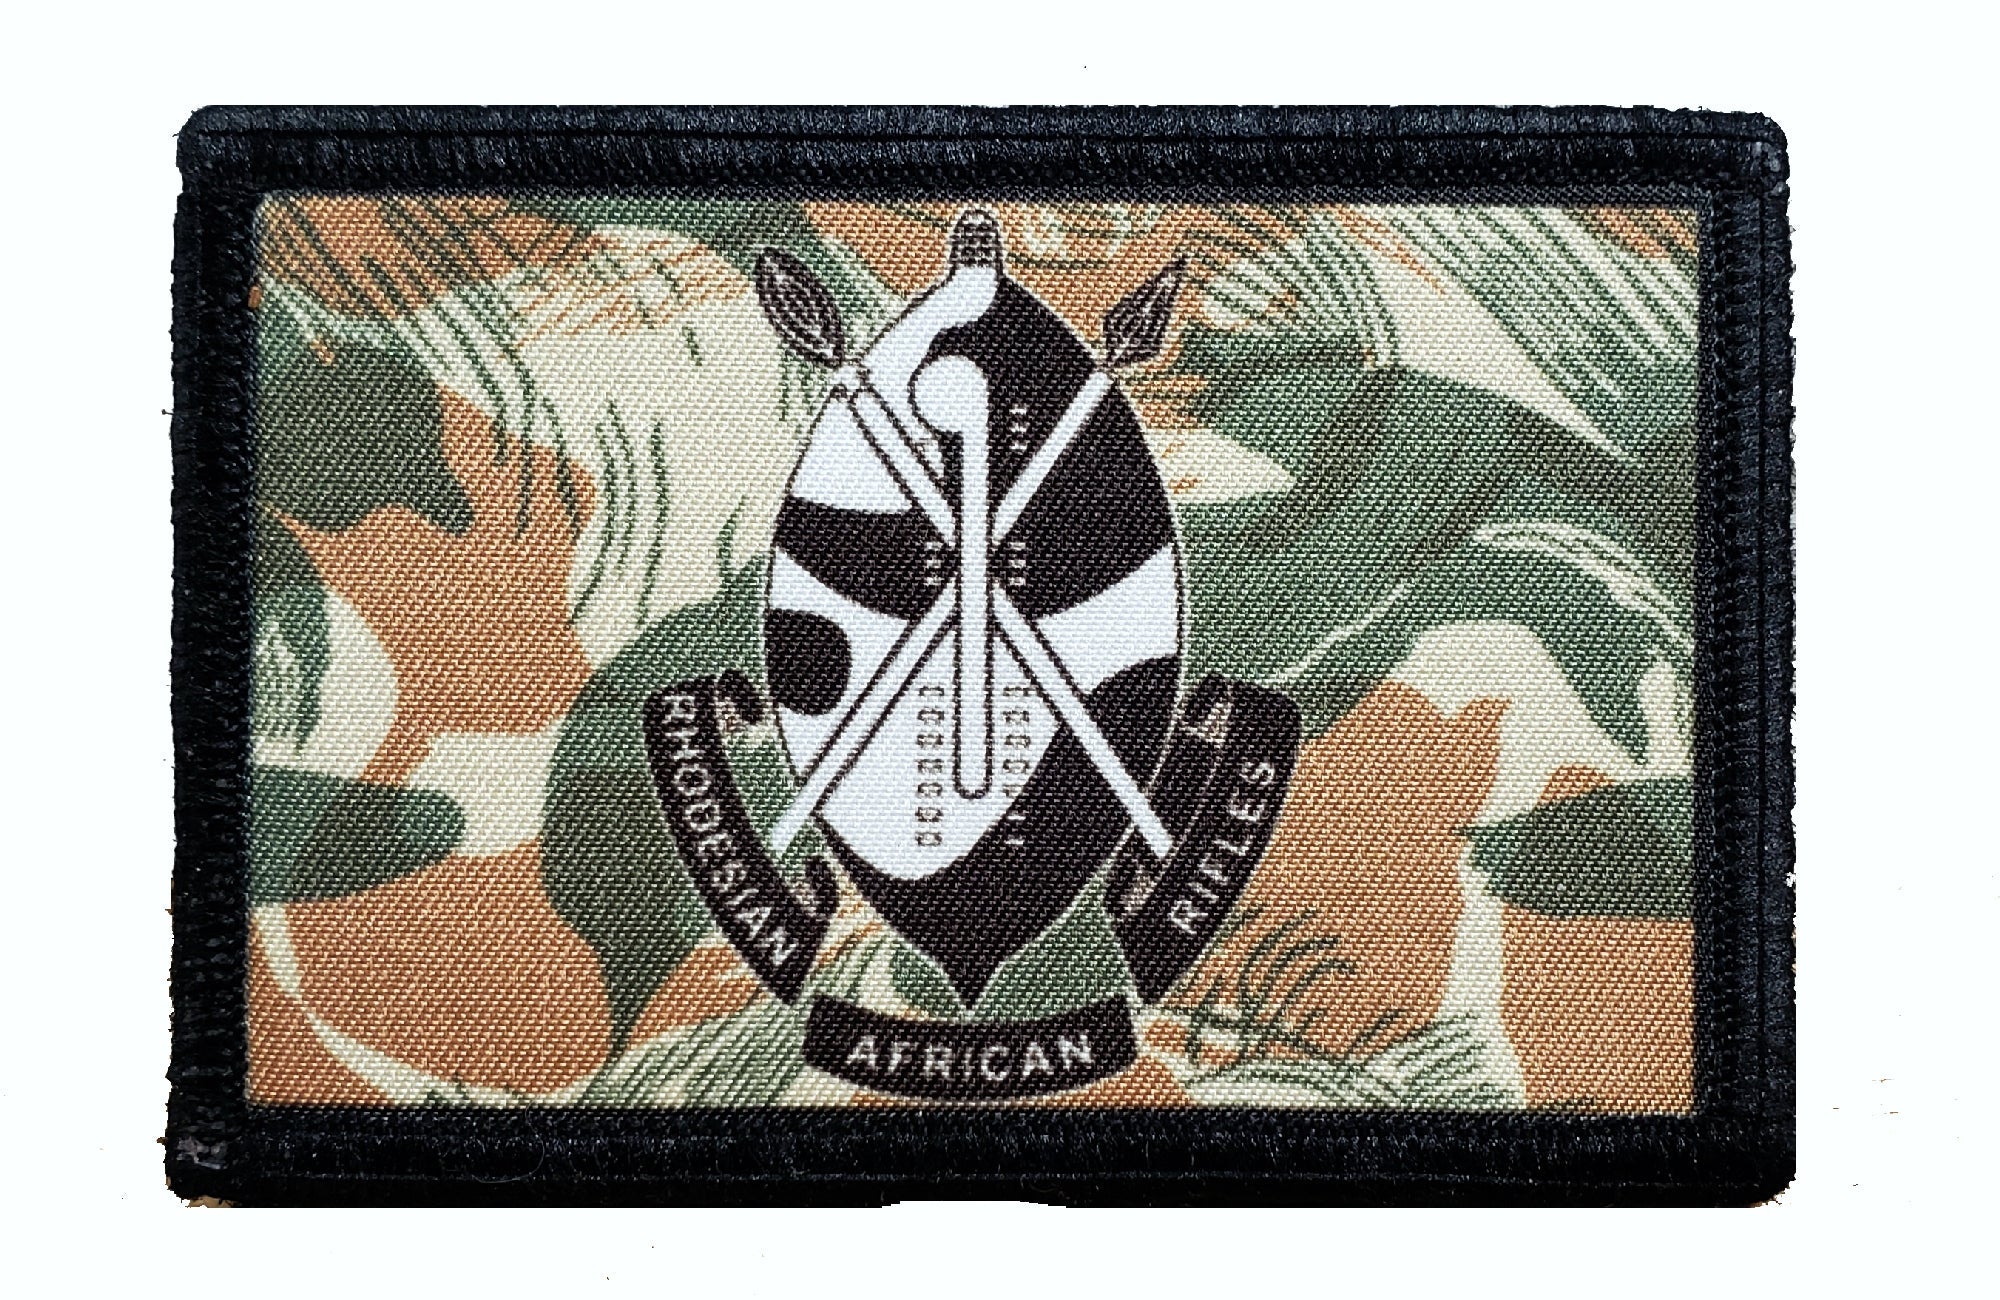 Rhodesian African Rifles Morale Patch Morale Patches Redheaded T Shirts 